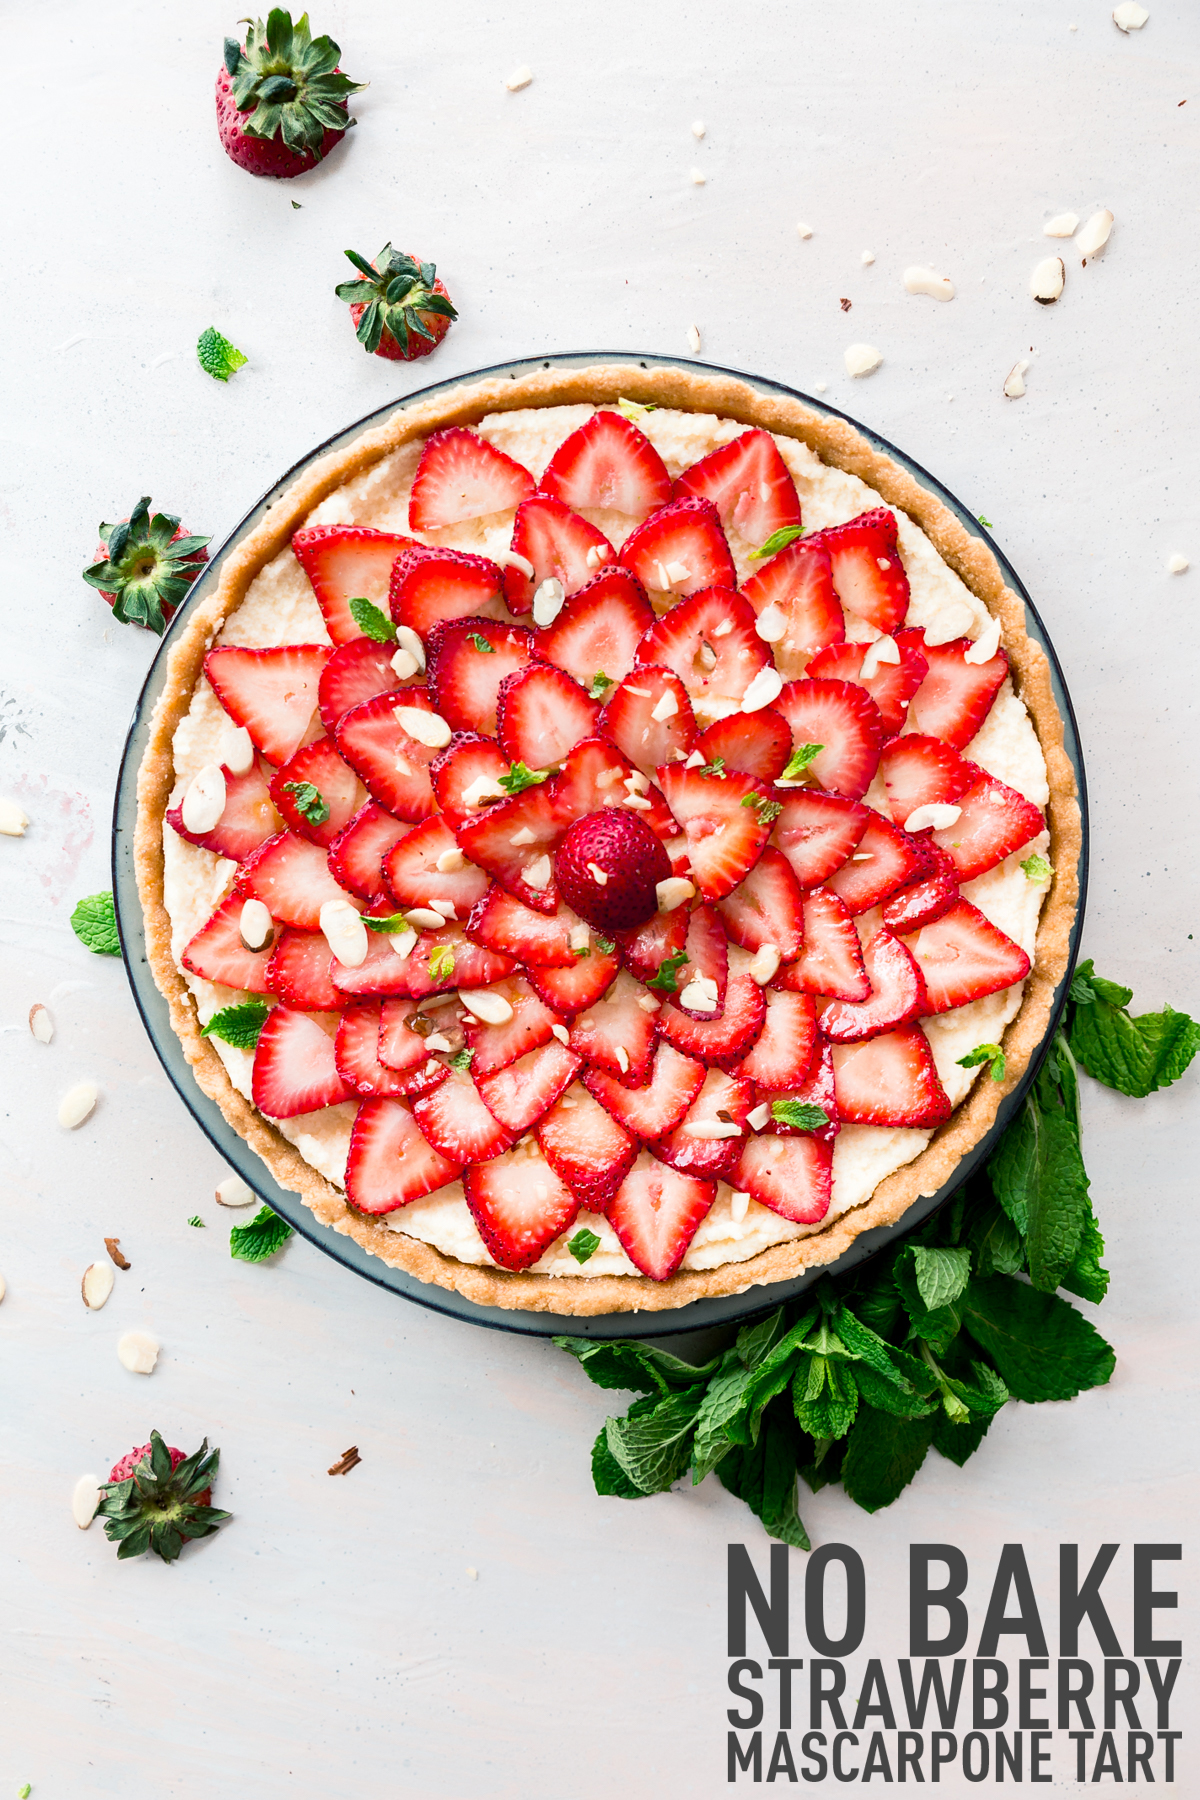 No-Bake Strawberry Mascaropone Tart made with fresh fruit and mascarpone cheese. Perfect for mother's day or any occasion.